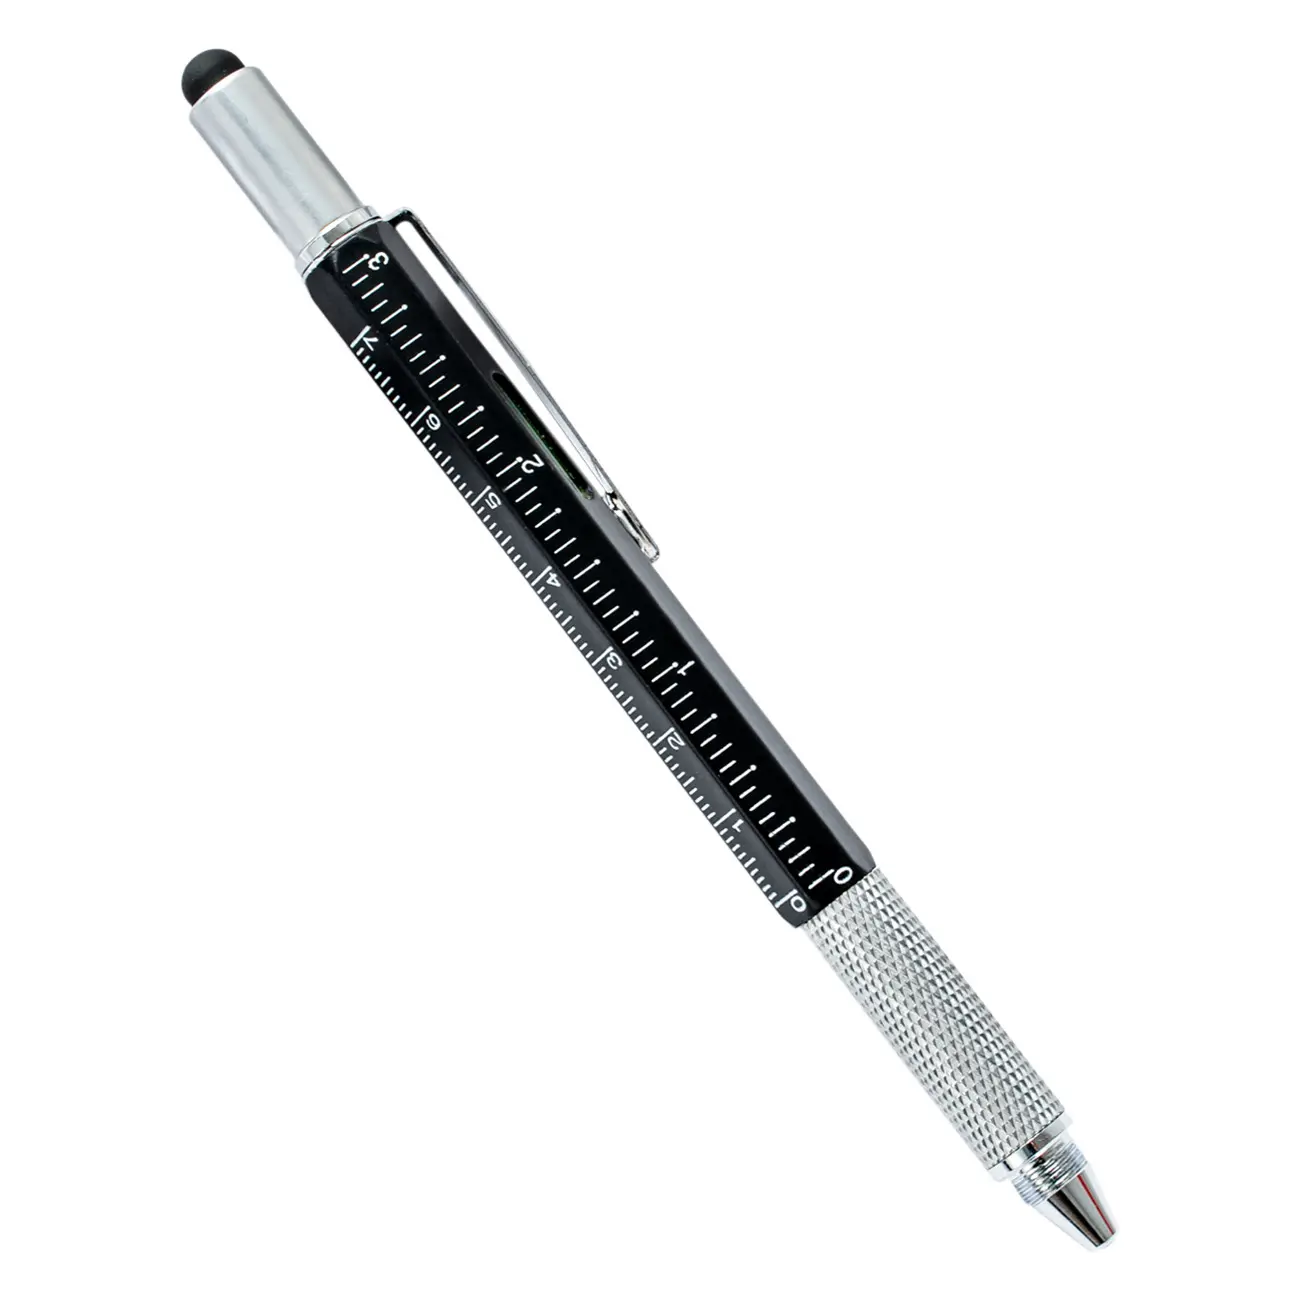 Multi-function multitool portable metal ballpoint pen with ruler scale spirit level meter and screwdriver